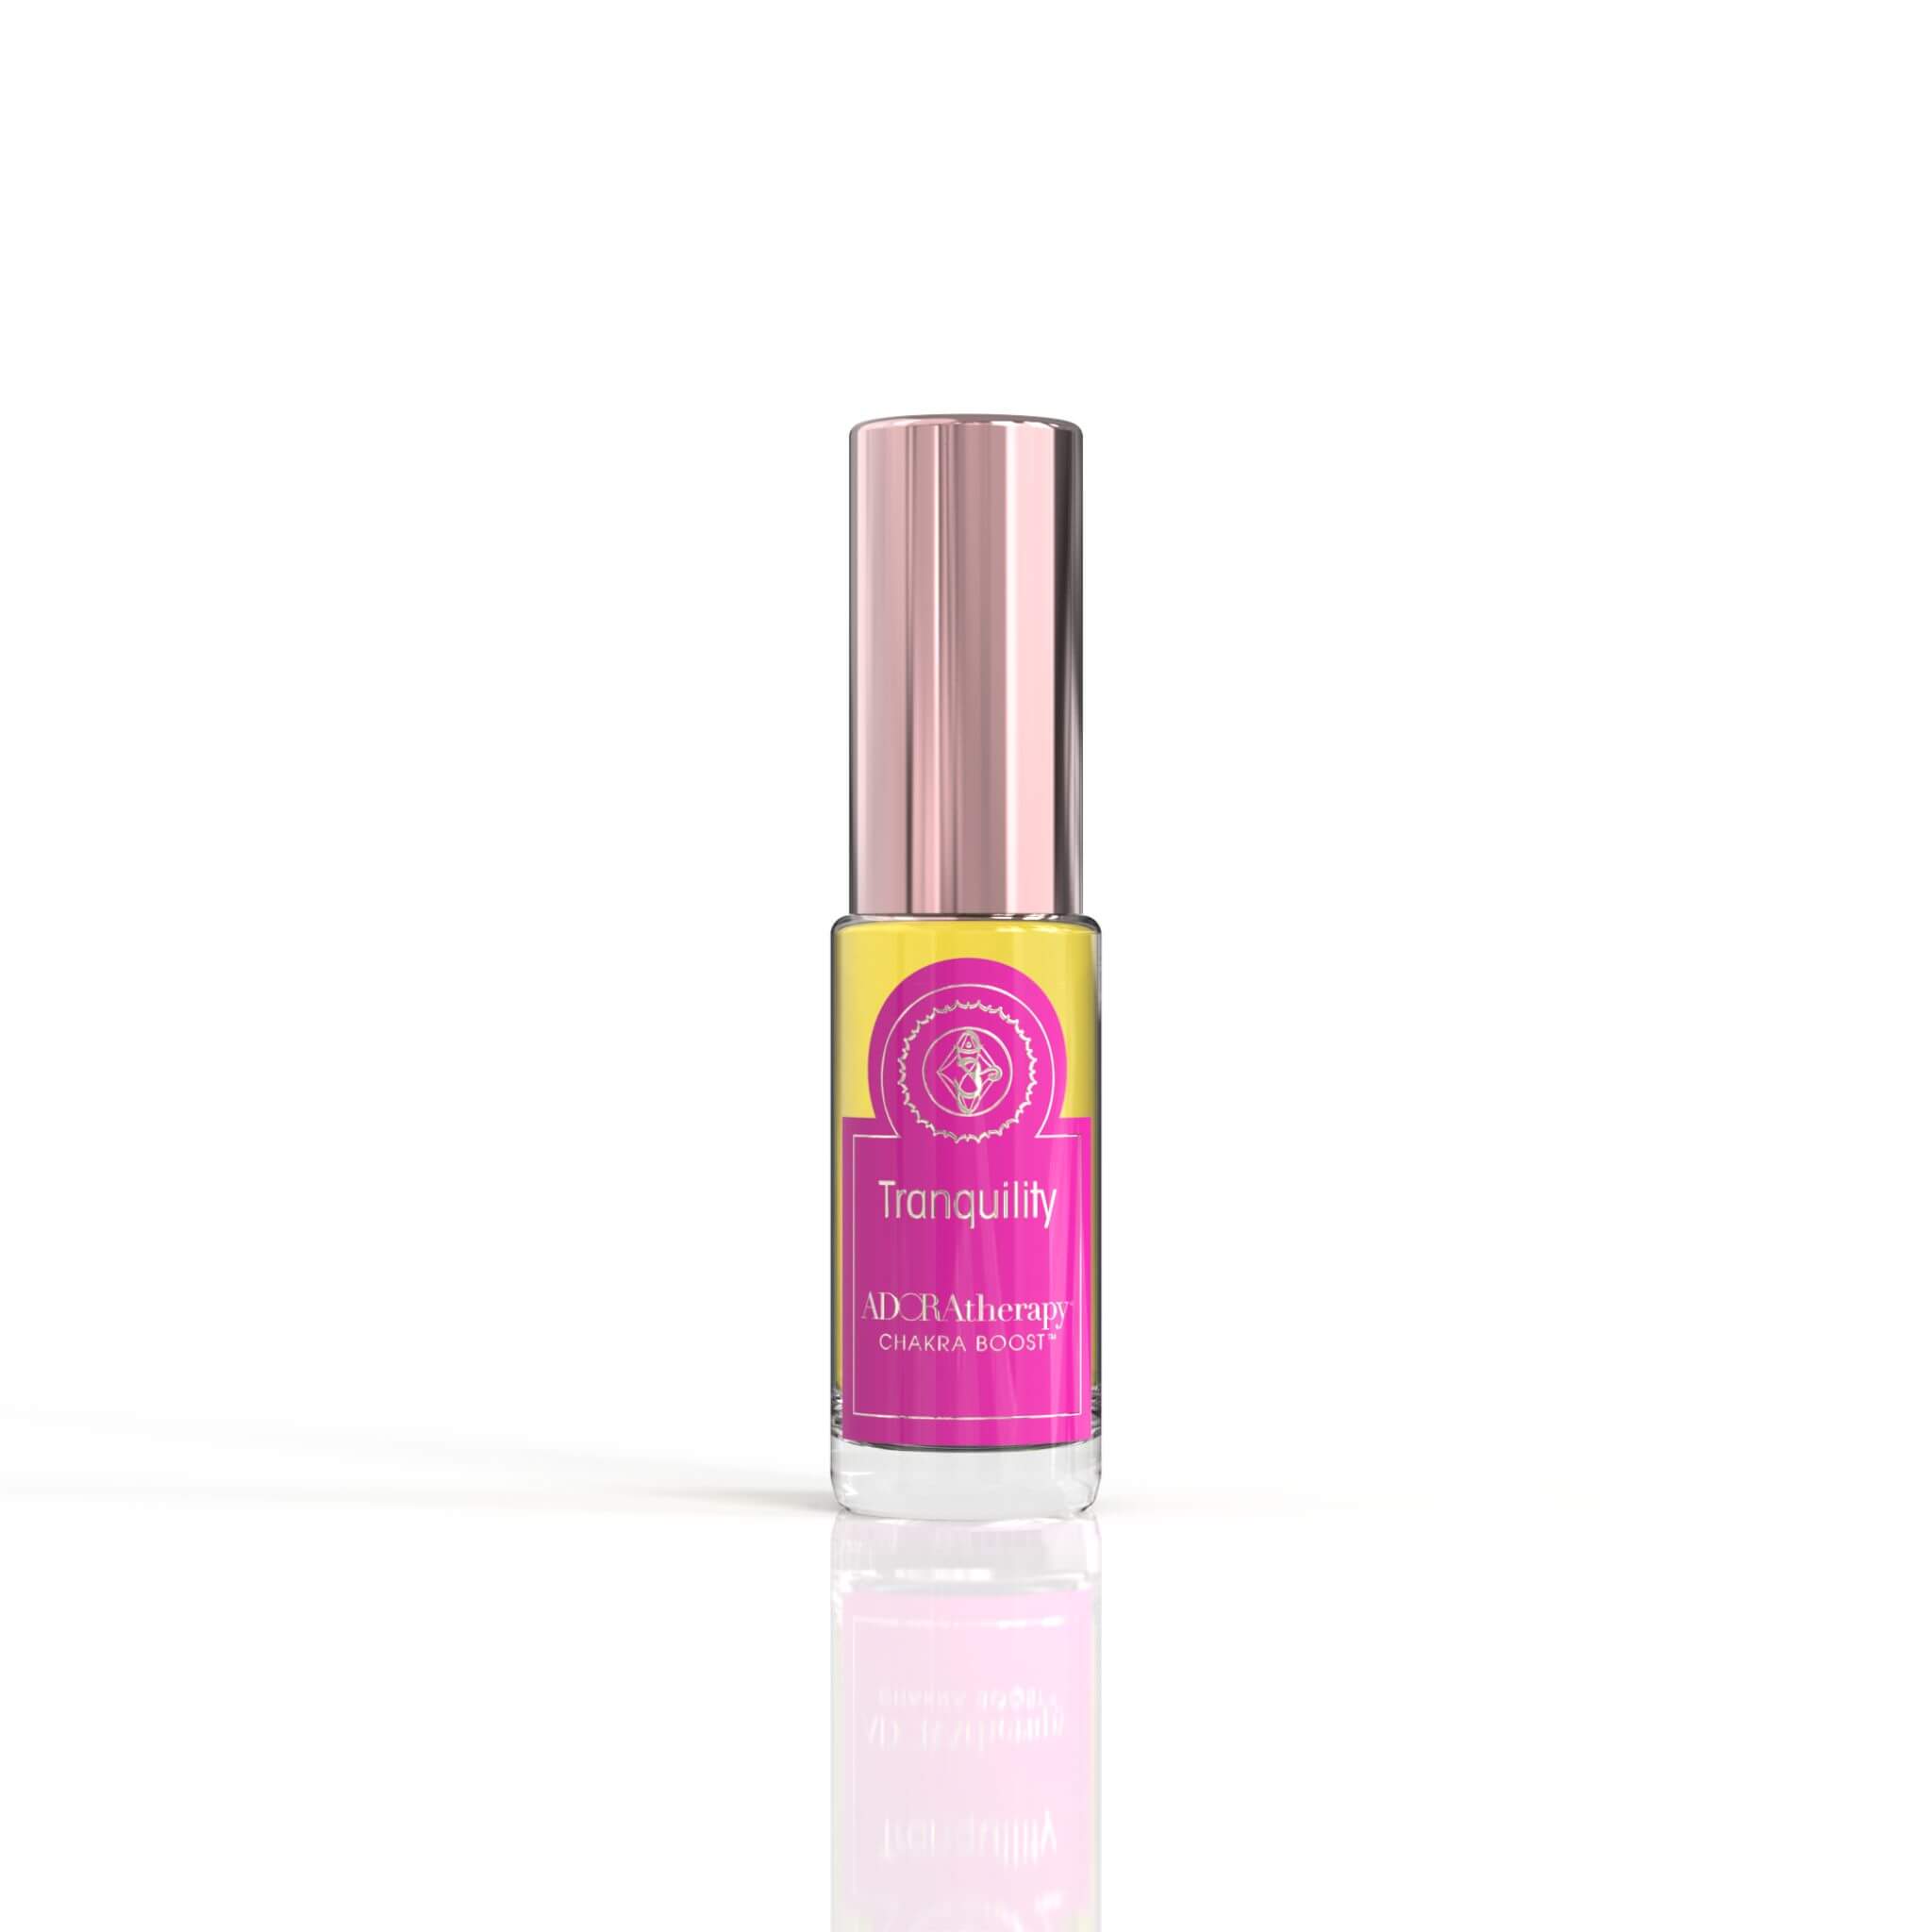 Chakra 7 Tranquility Roll On Perfume Oil by ADORAtherapy